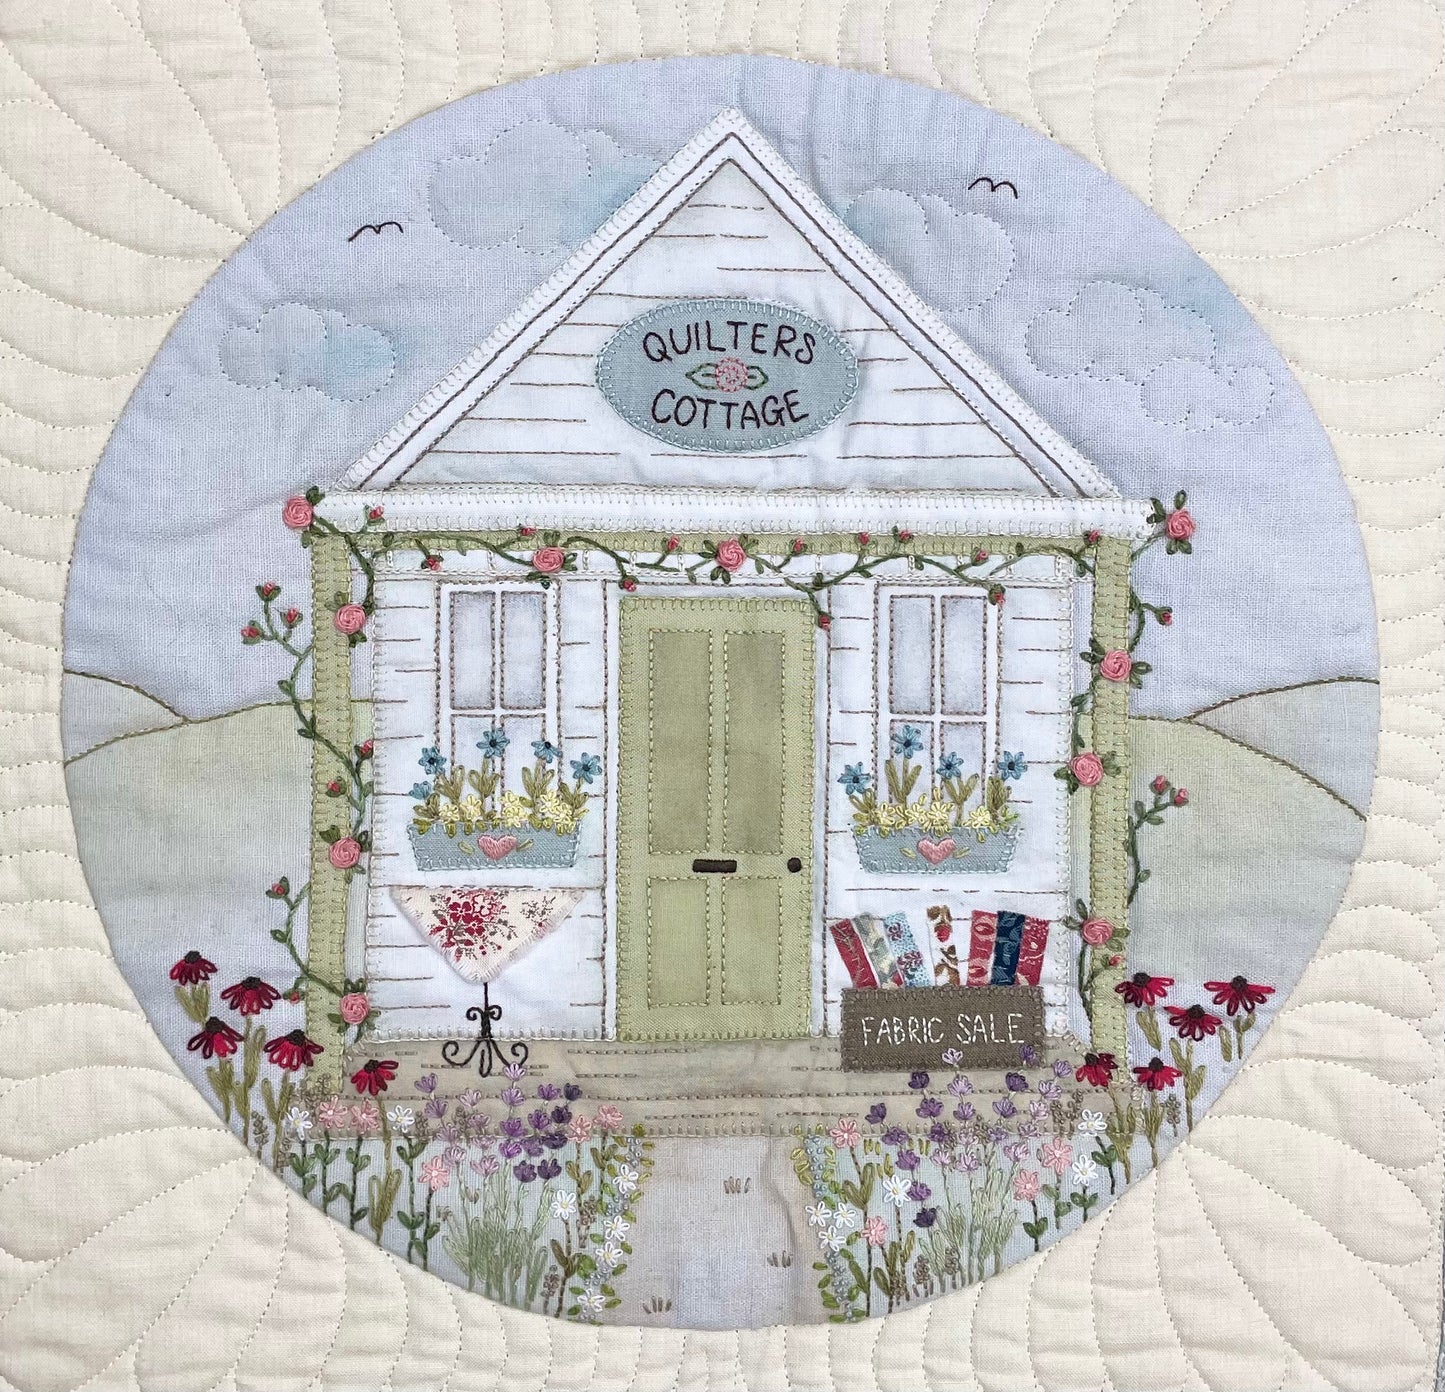 Quilter's Cottage Quilt Full fabric kit by Libby Richardson